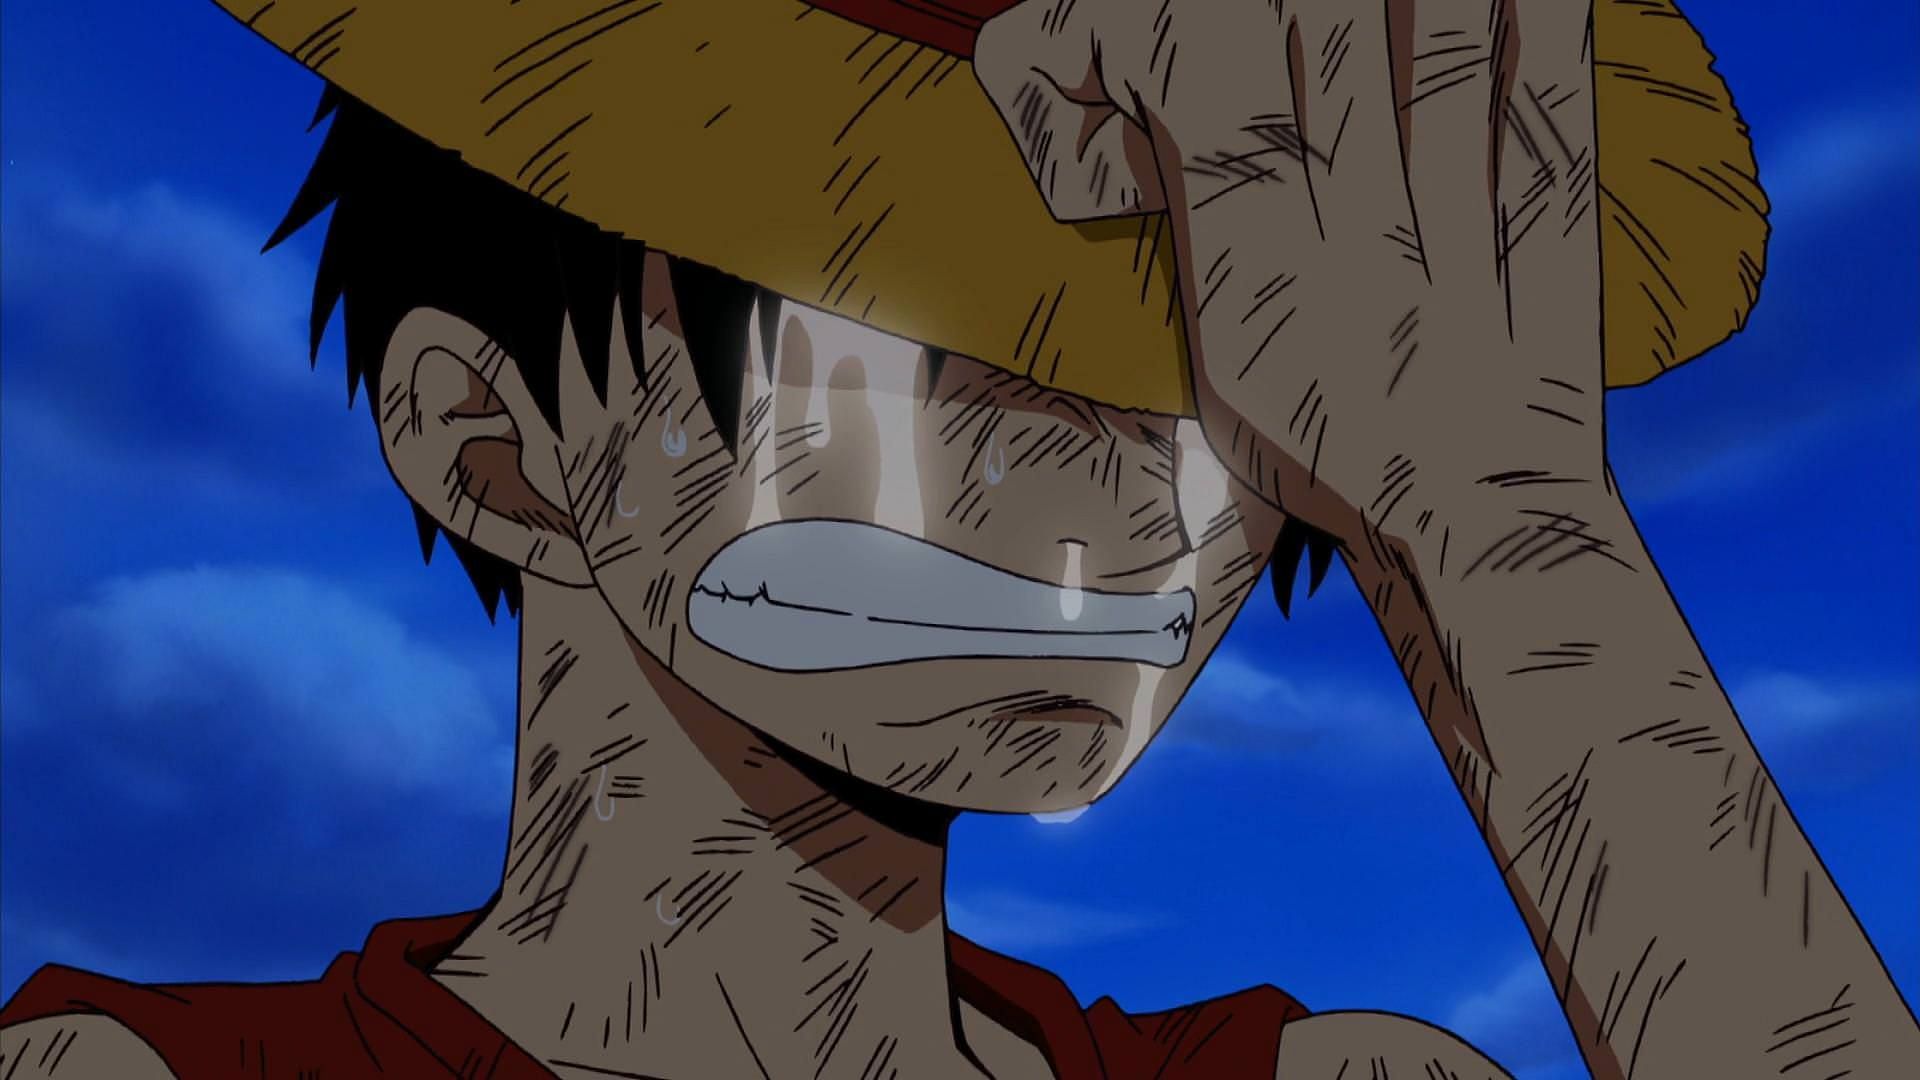 Many series fans are disappointed that &lsquo;One Piece&rsquo; Chapter 1044 and Episode 1015&rsquo;s releases are no longer synchronous (Image Credits: Eiichiro Oda/Shueisha, Viz Media, One Piece)